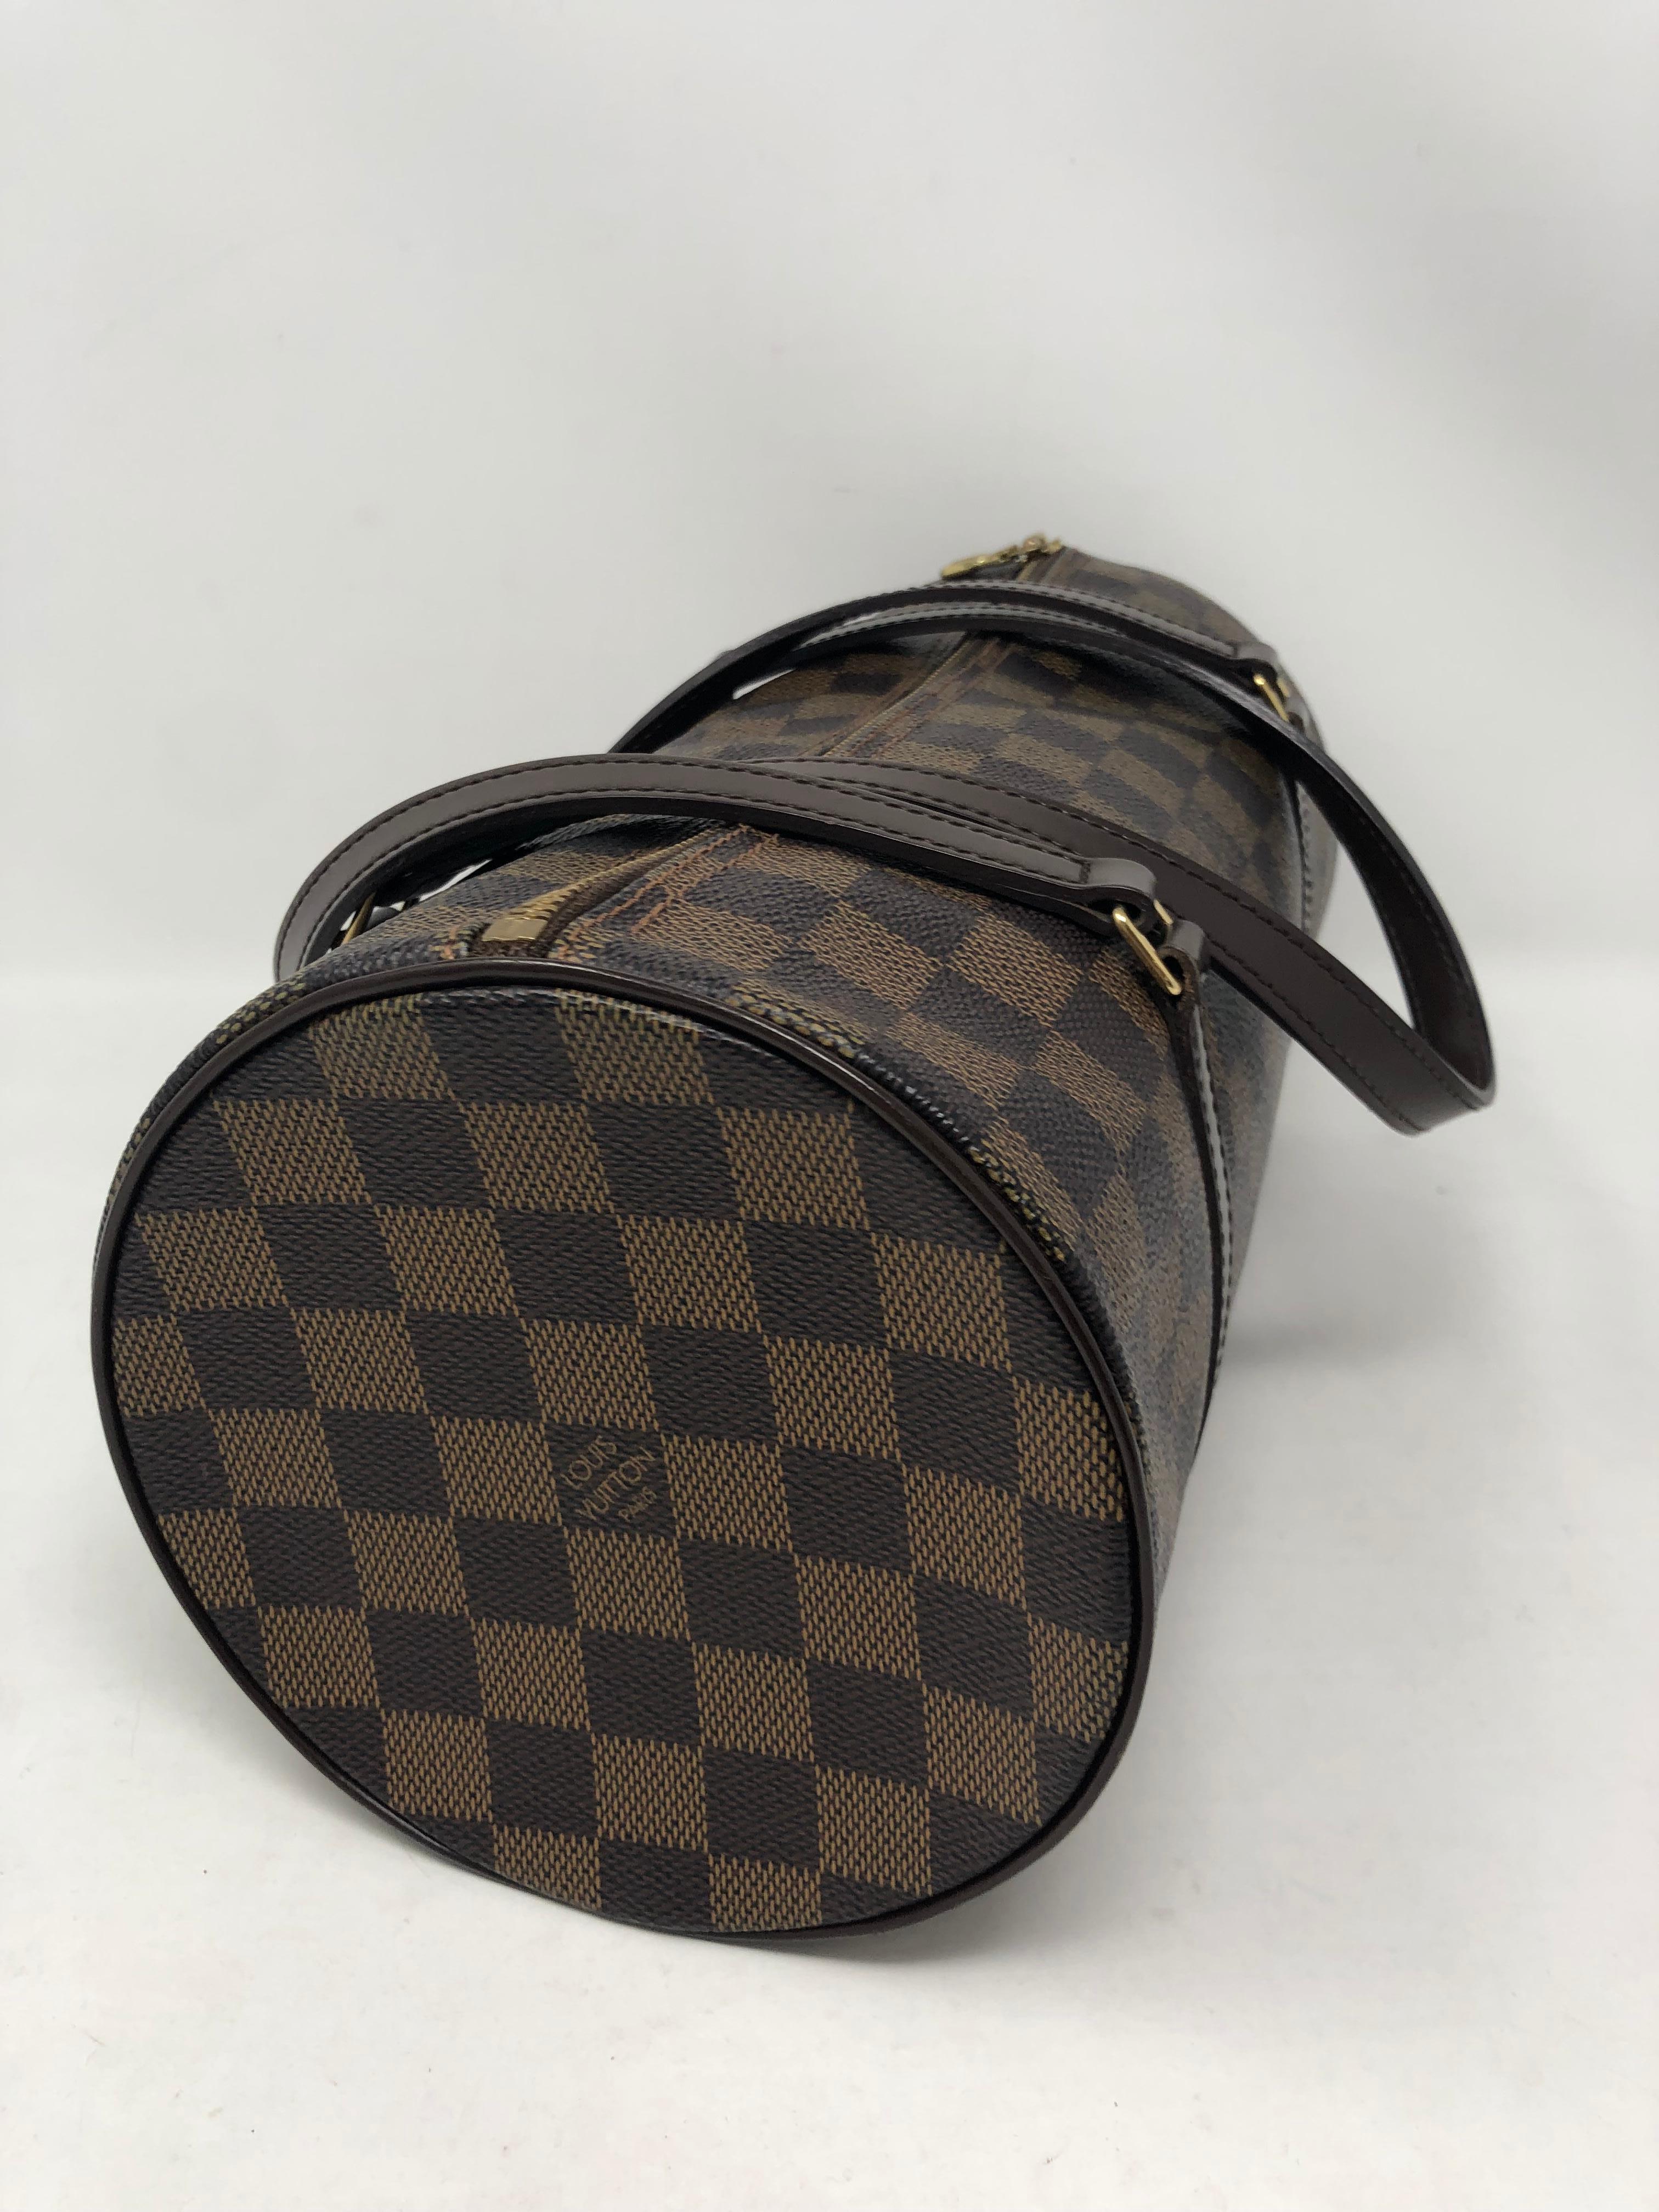 Louis Vuitton Damier Ebene Papillon. Tootsie Roll style LV bag. Barrel shaped. Retired style. Larger size. Classic bag. Red leather interior. Vintage Louis Vuitton. Guaranteed authentic. 